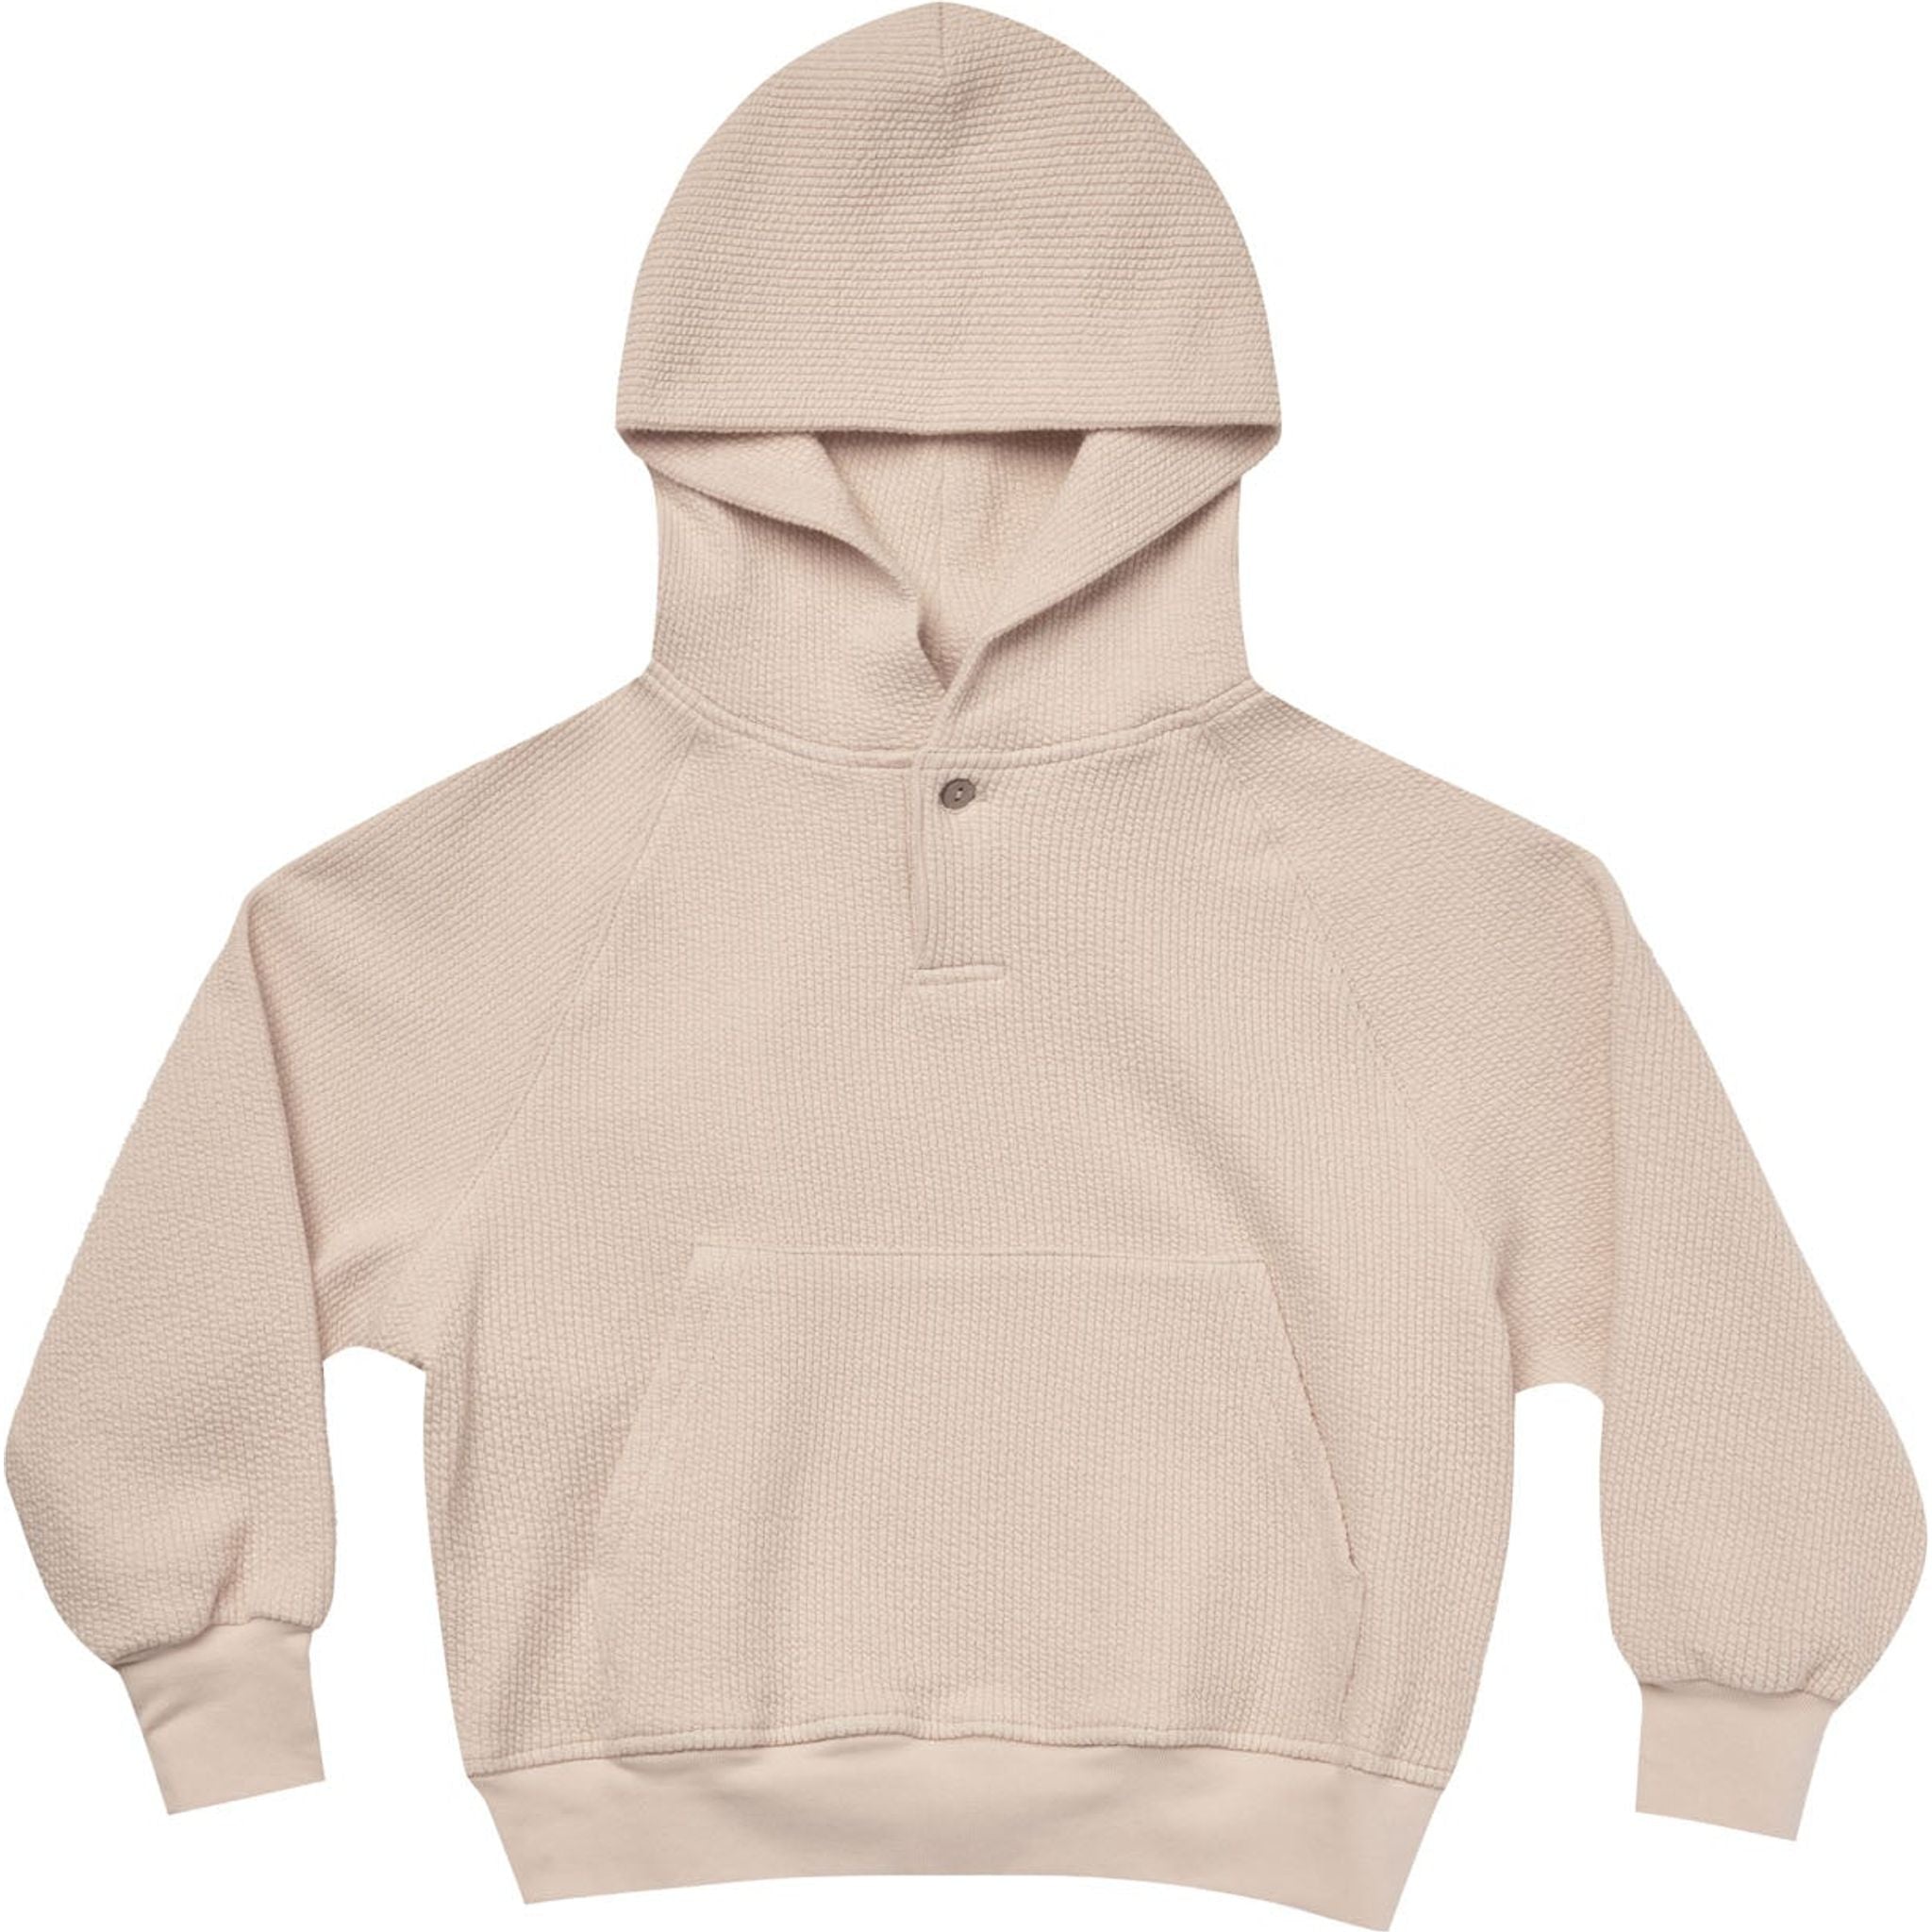 cream colored Relaxed fit henley hoodie in soft and cozy textured knit sweatshirt fabric